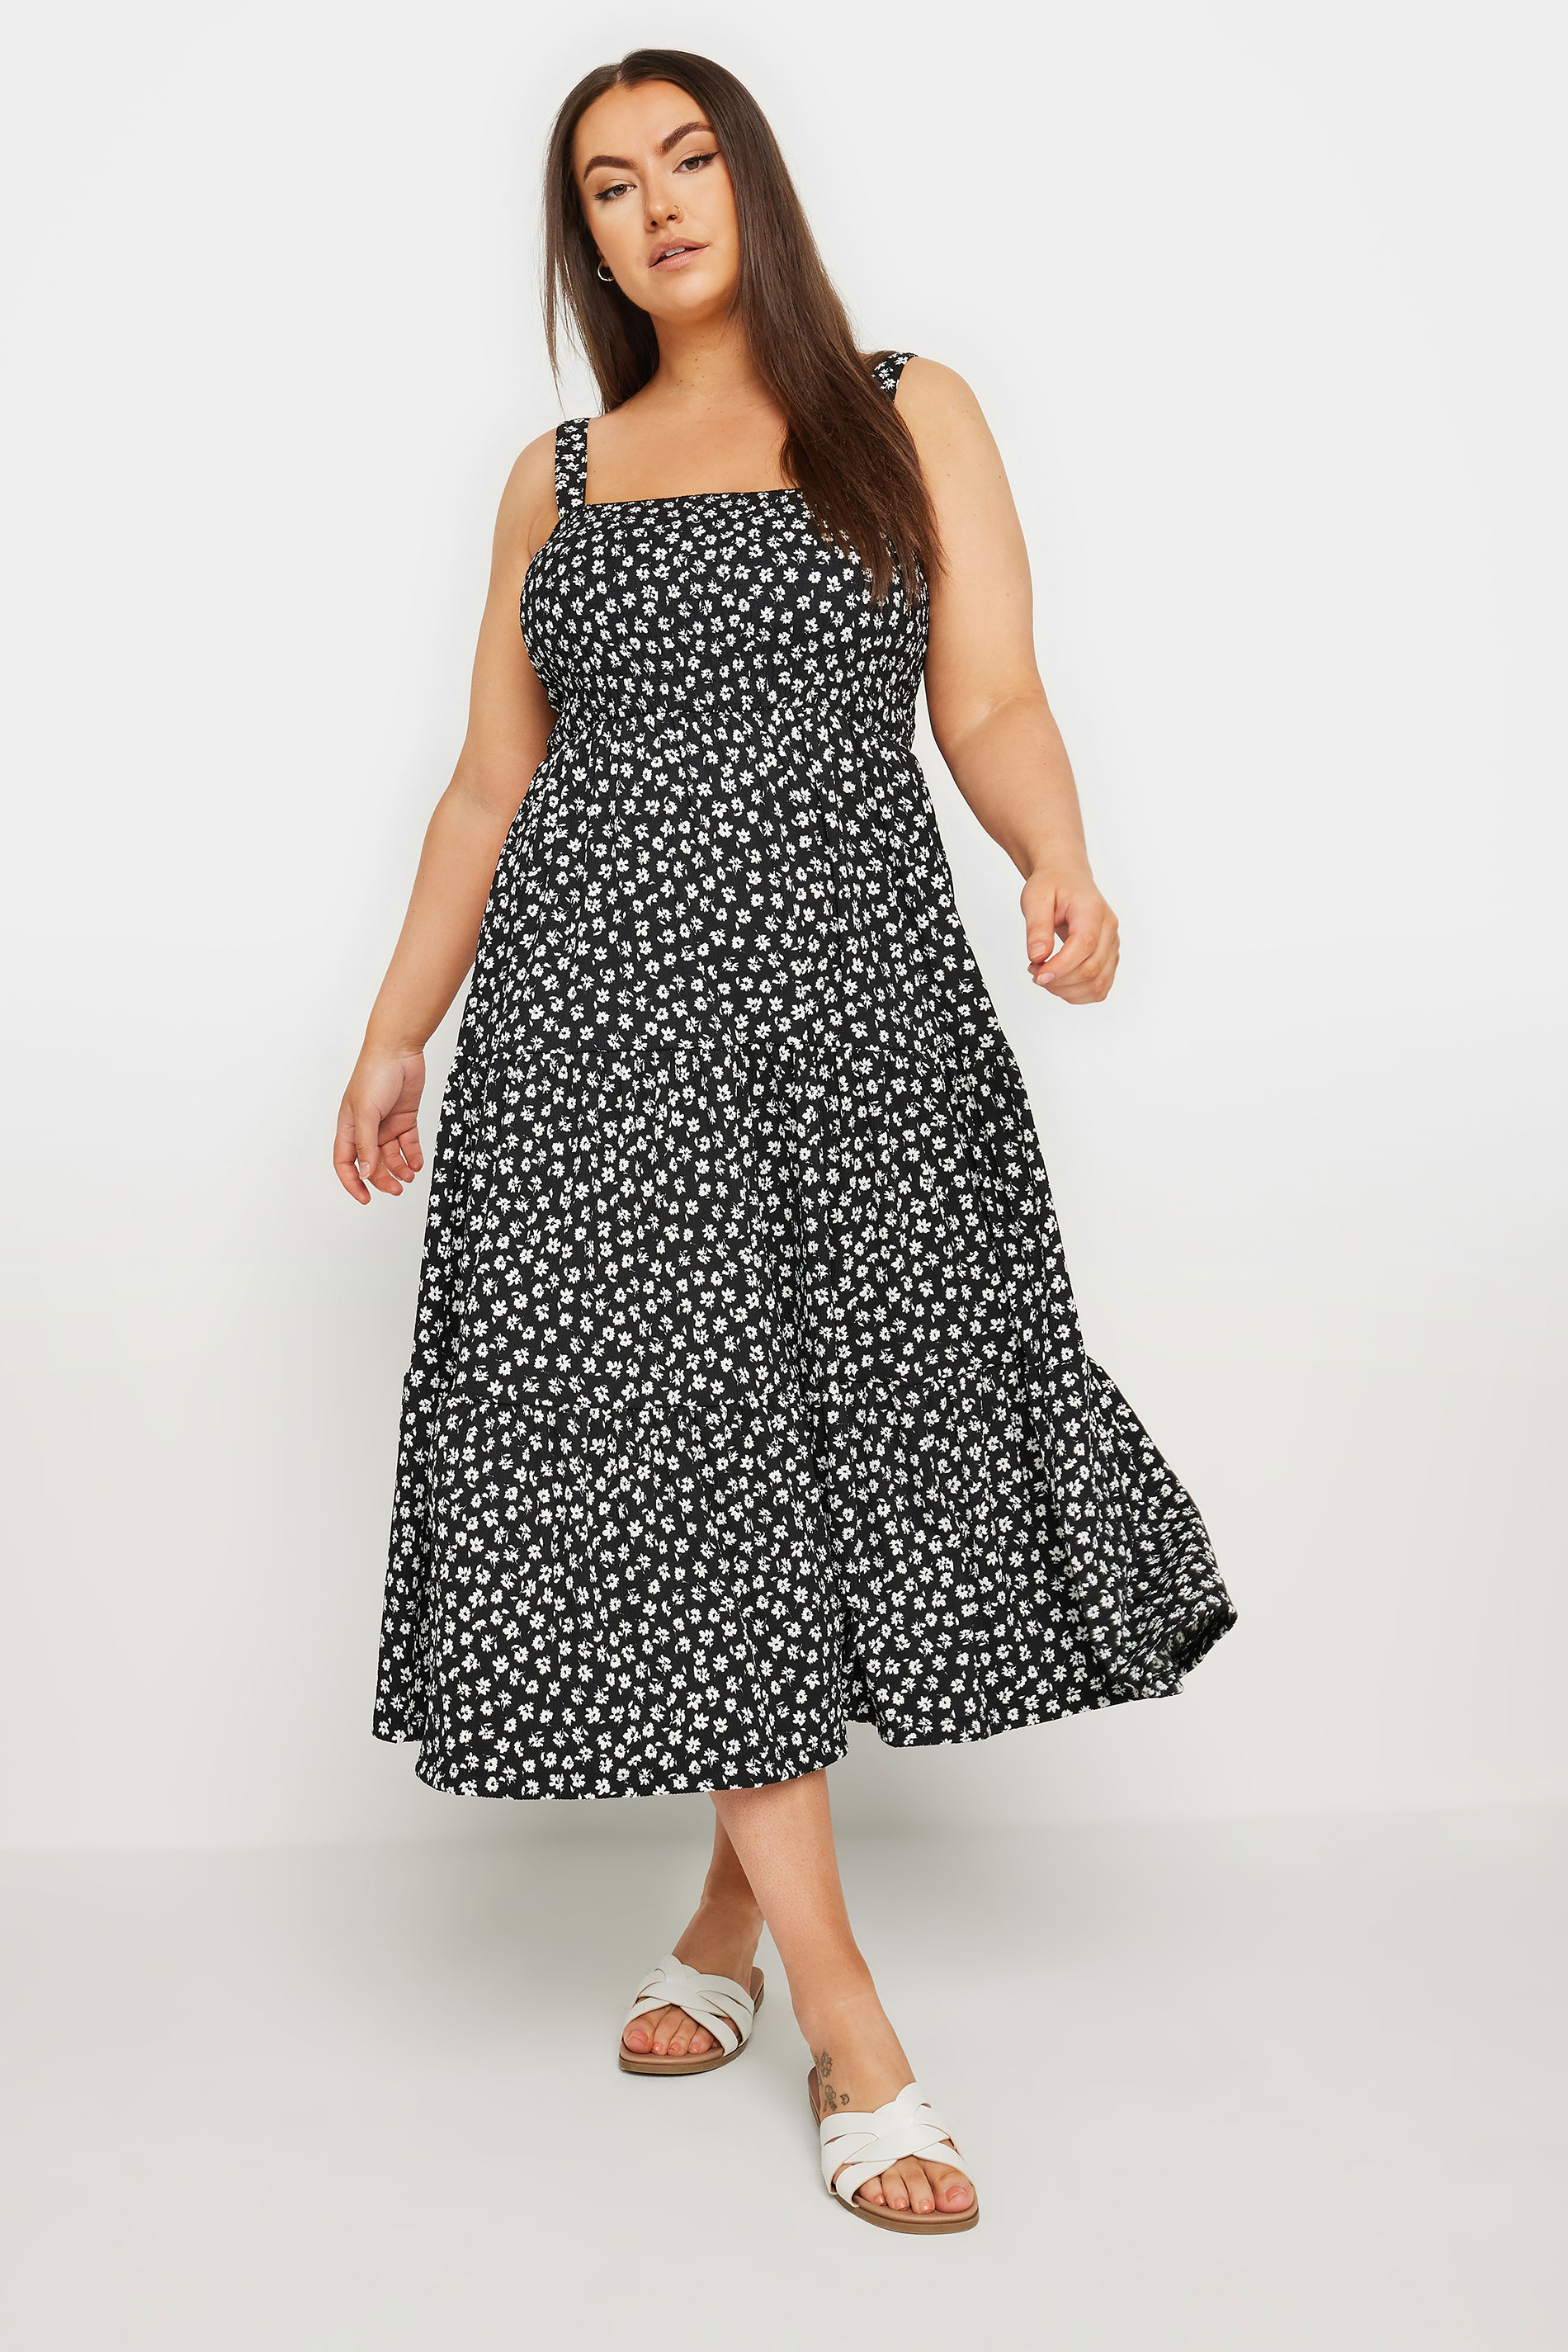 YOURS Plus Size Black Floral Print Textured Midaxi Dress | Yours Clothing 1